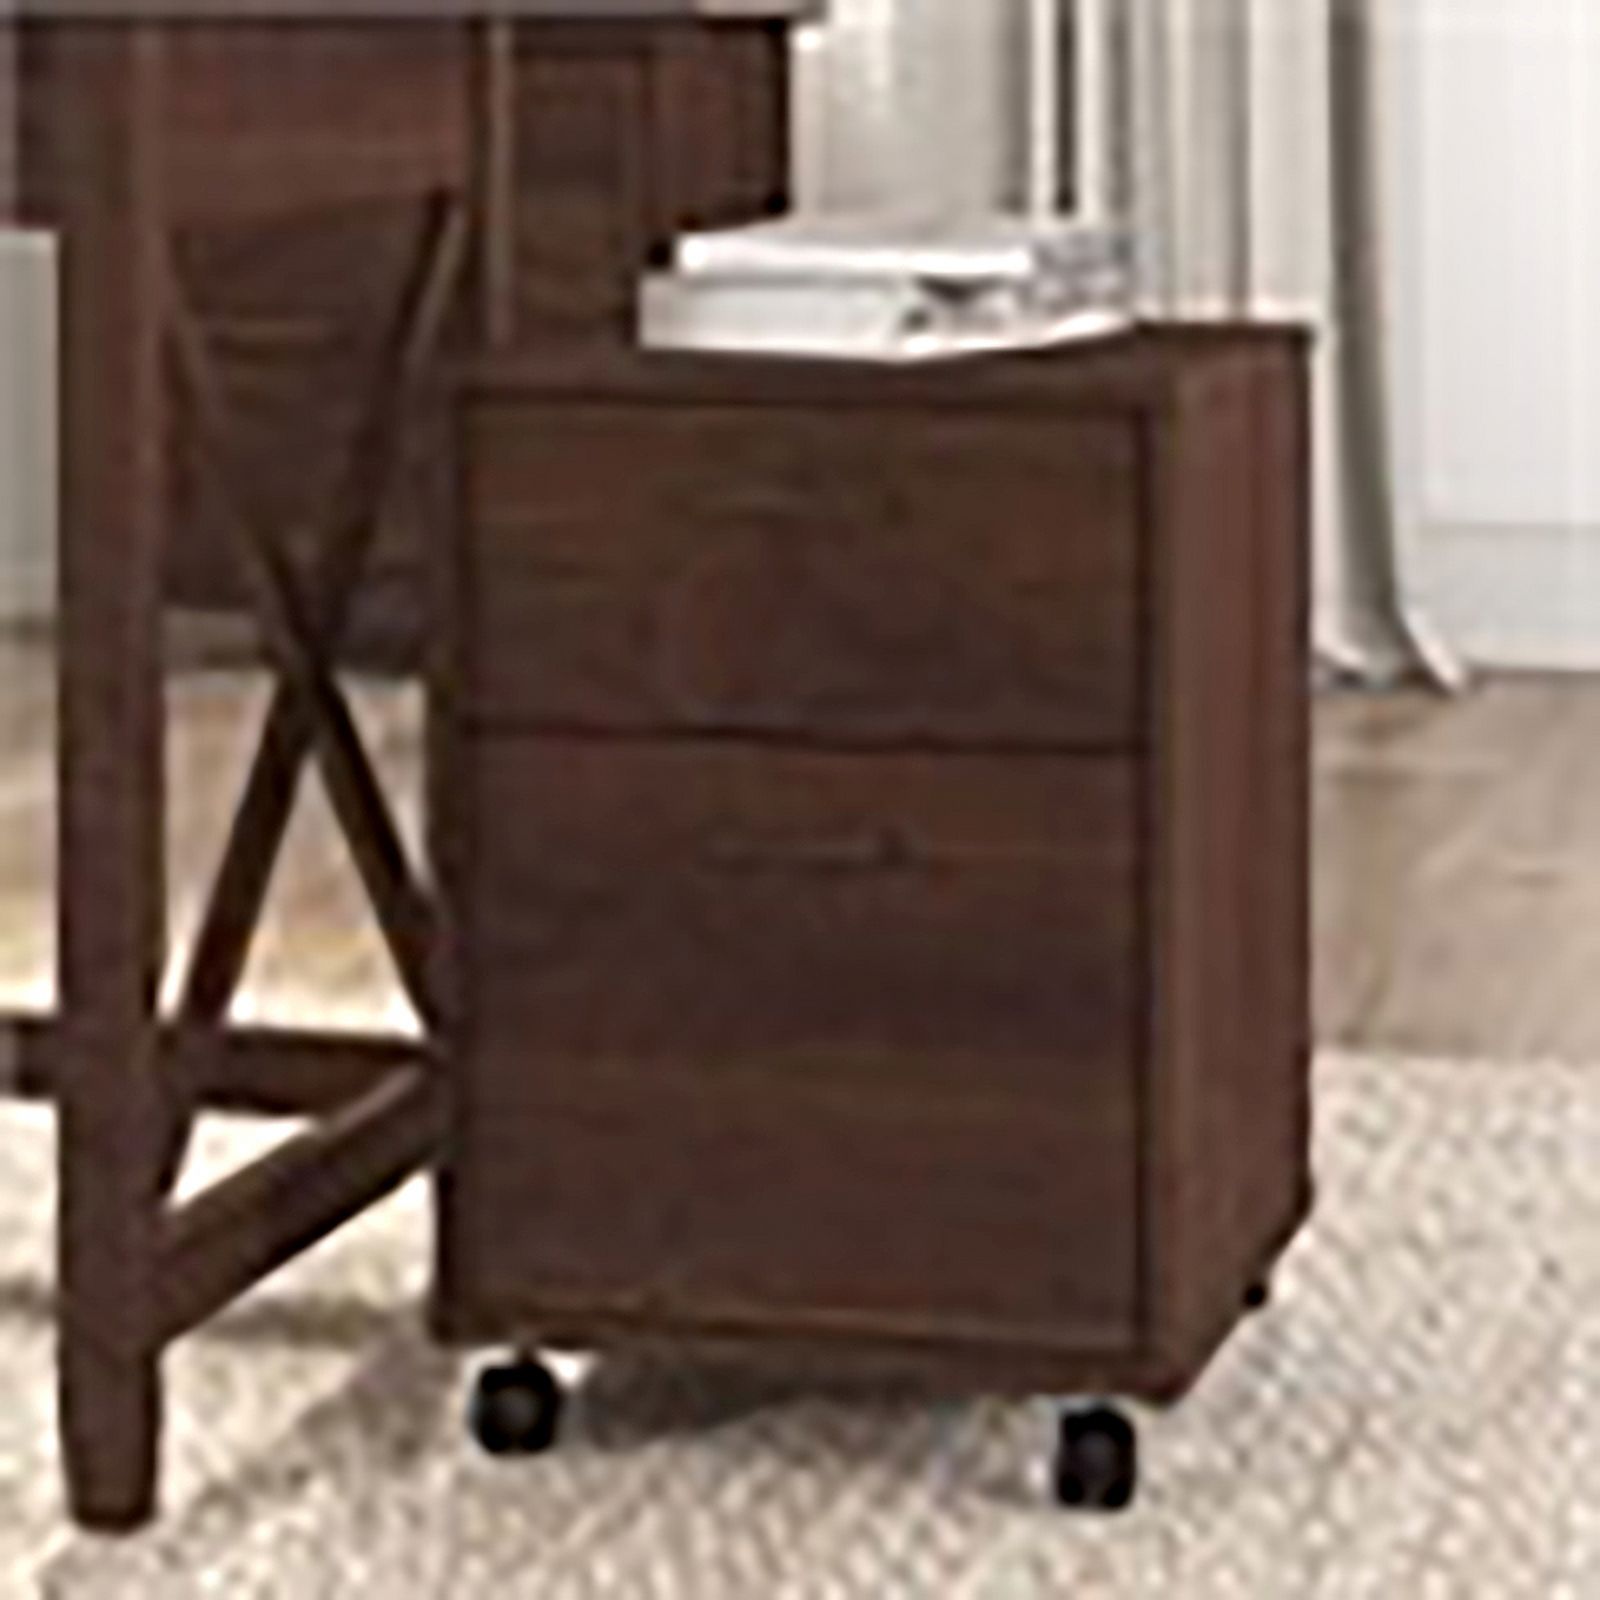 Scranton & Co 2-Drawer Wood Mobile File Cabinet in Bing Cherry - image 3 of 8